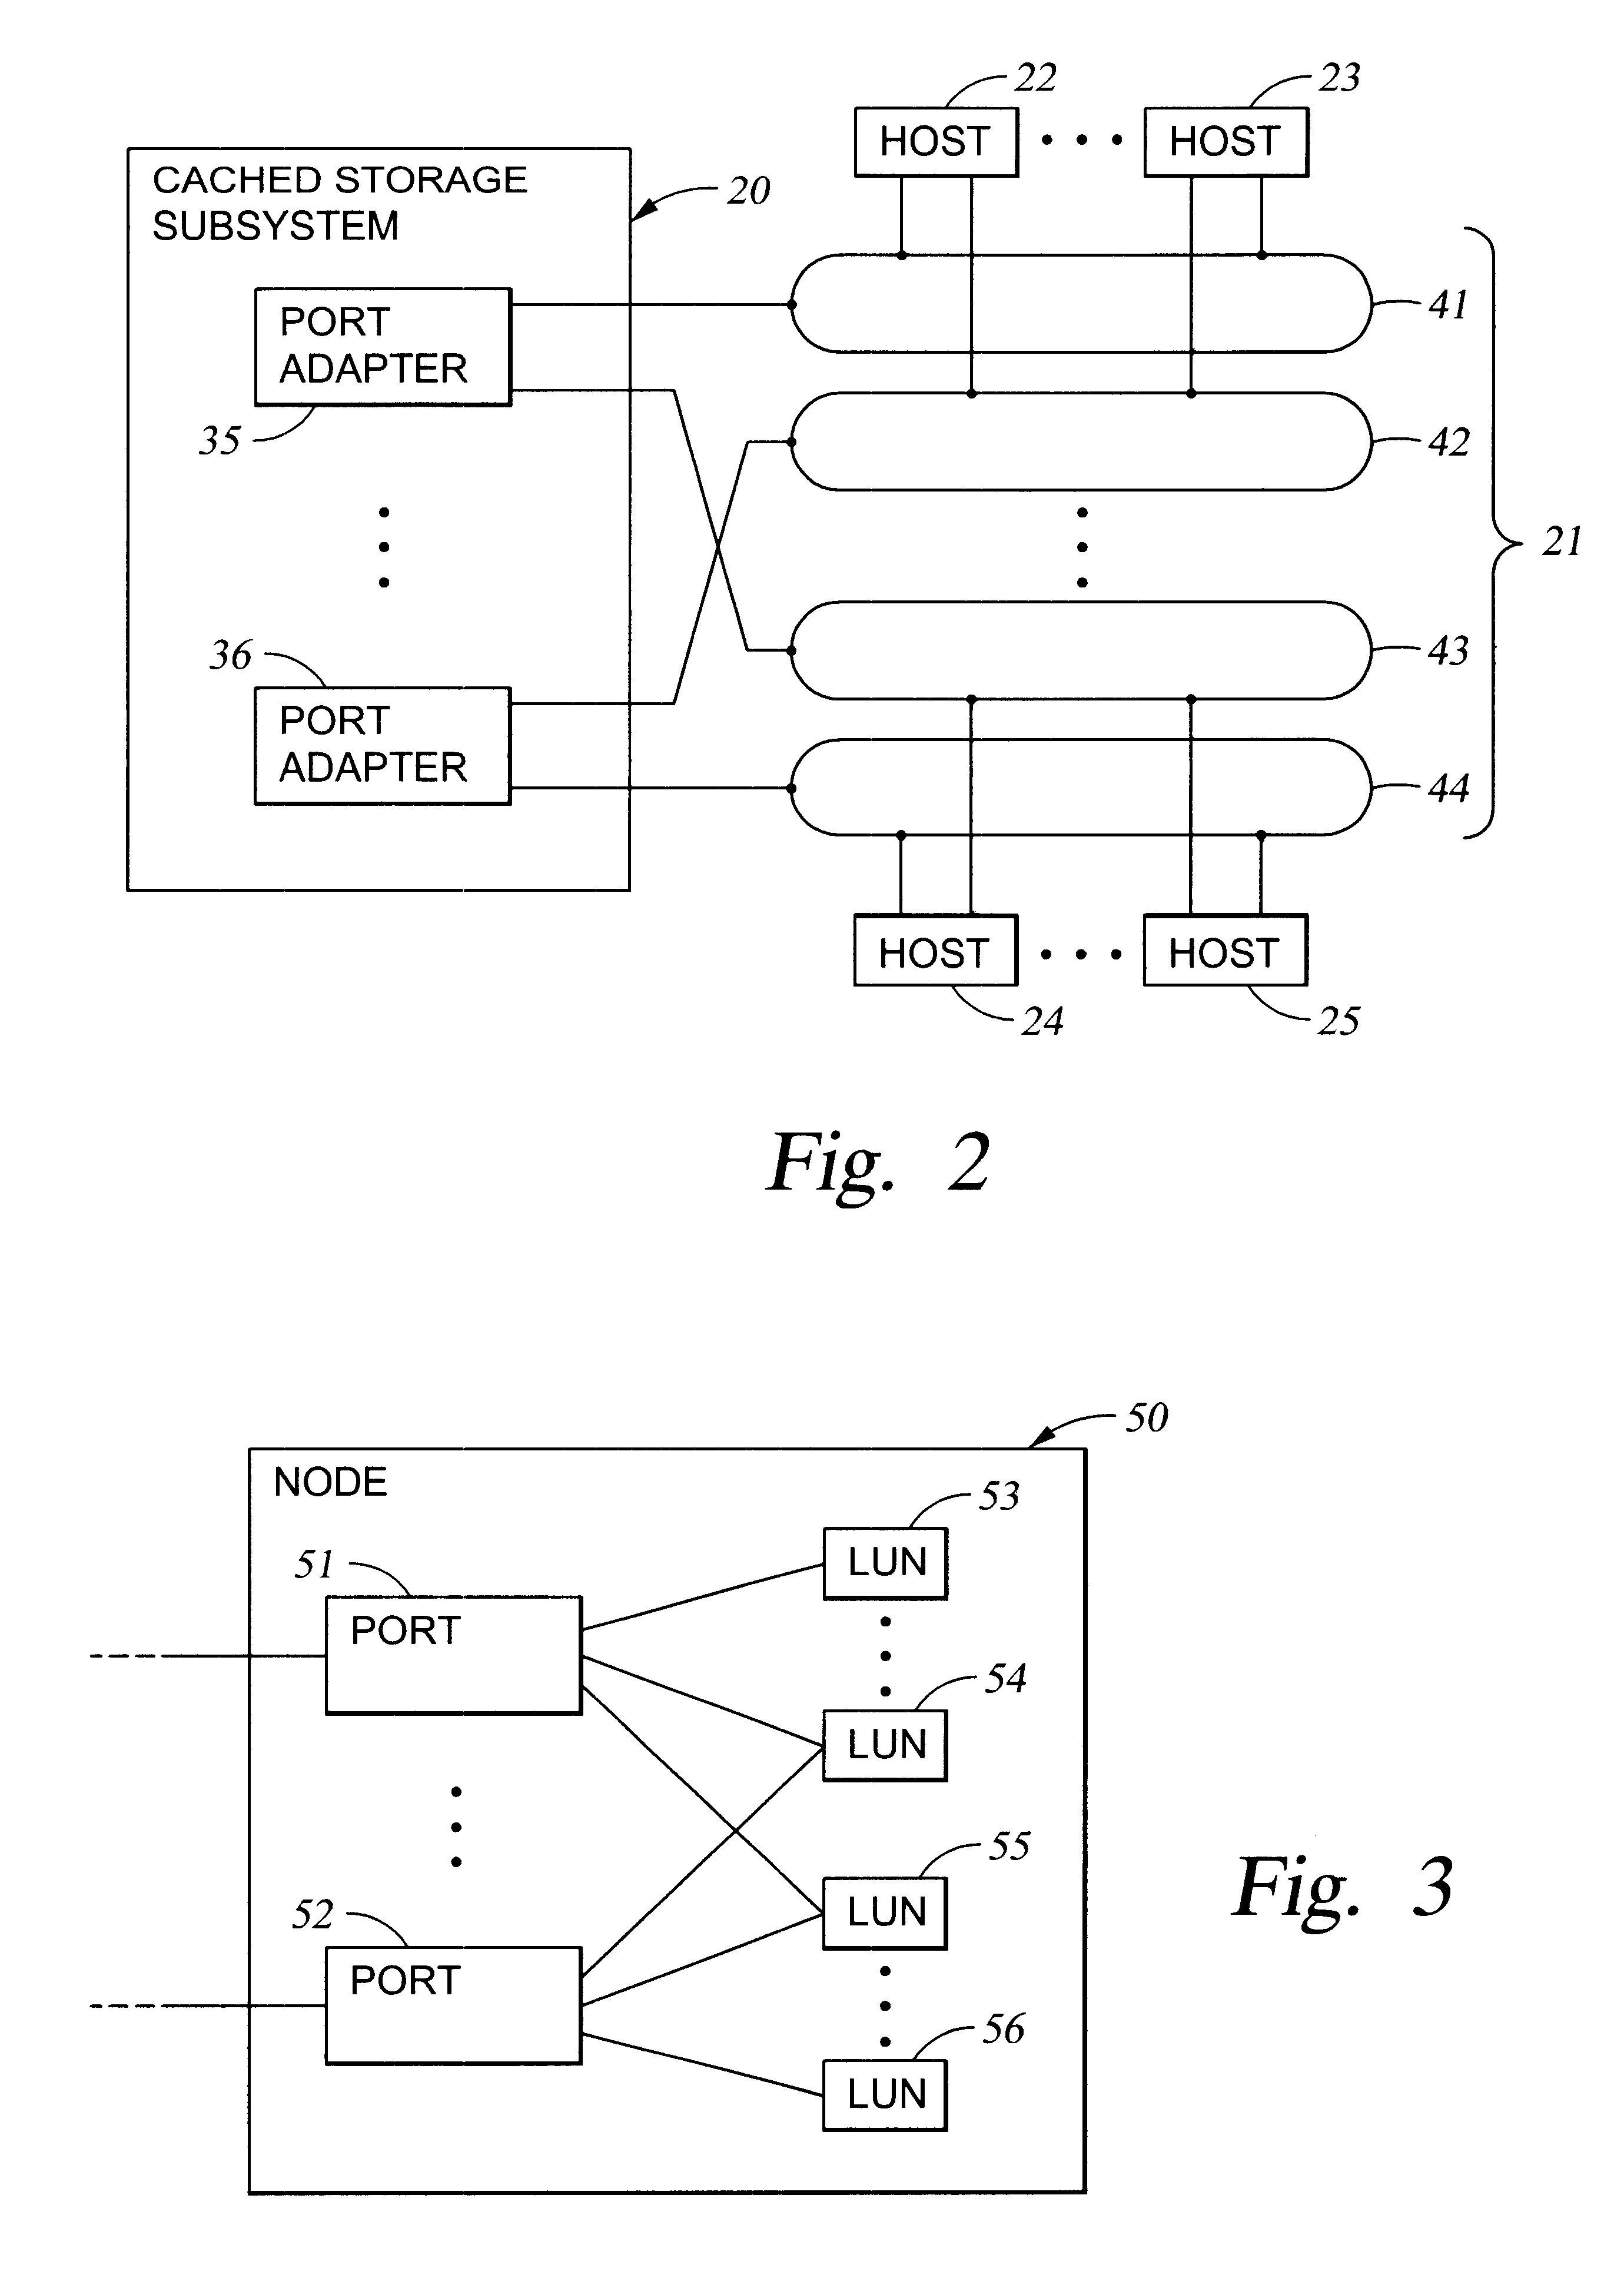 Authentication of a host processor requesting service in a data processing network